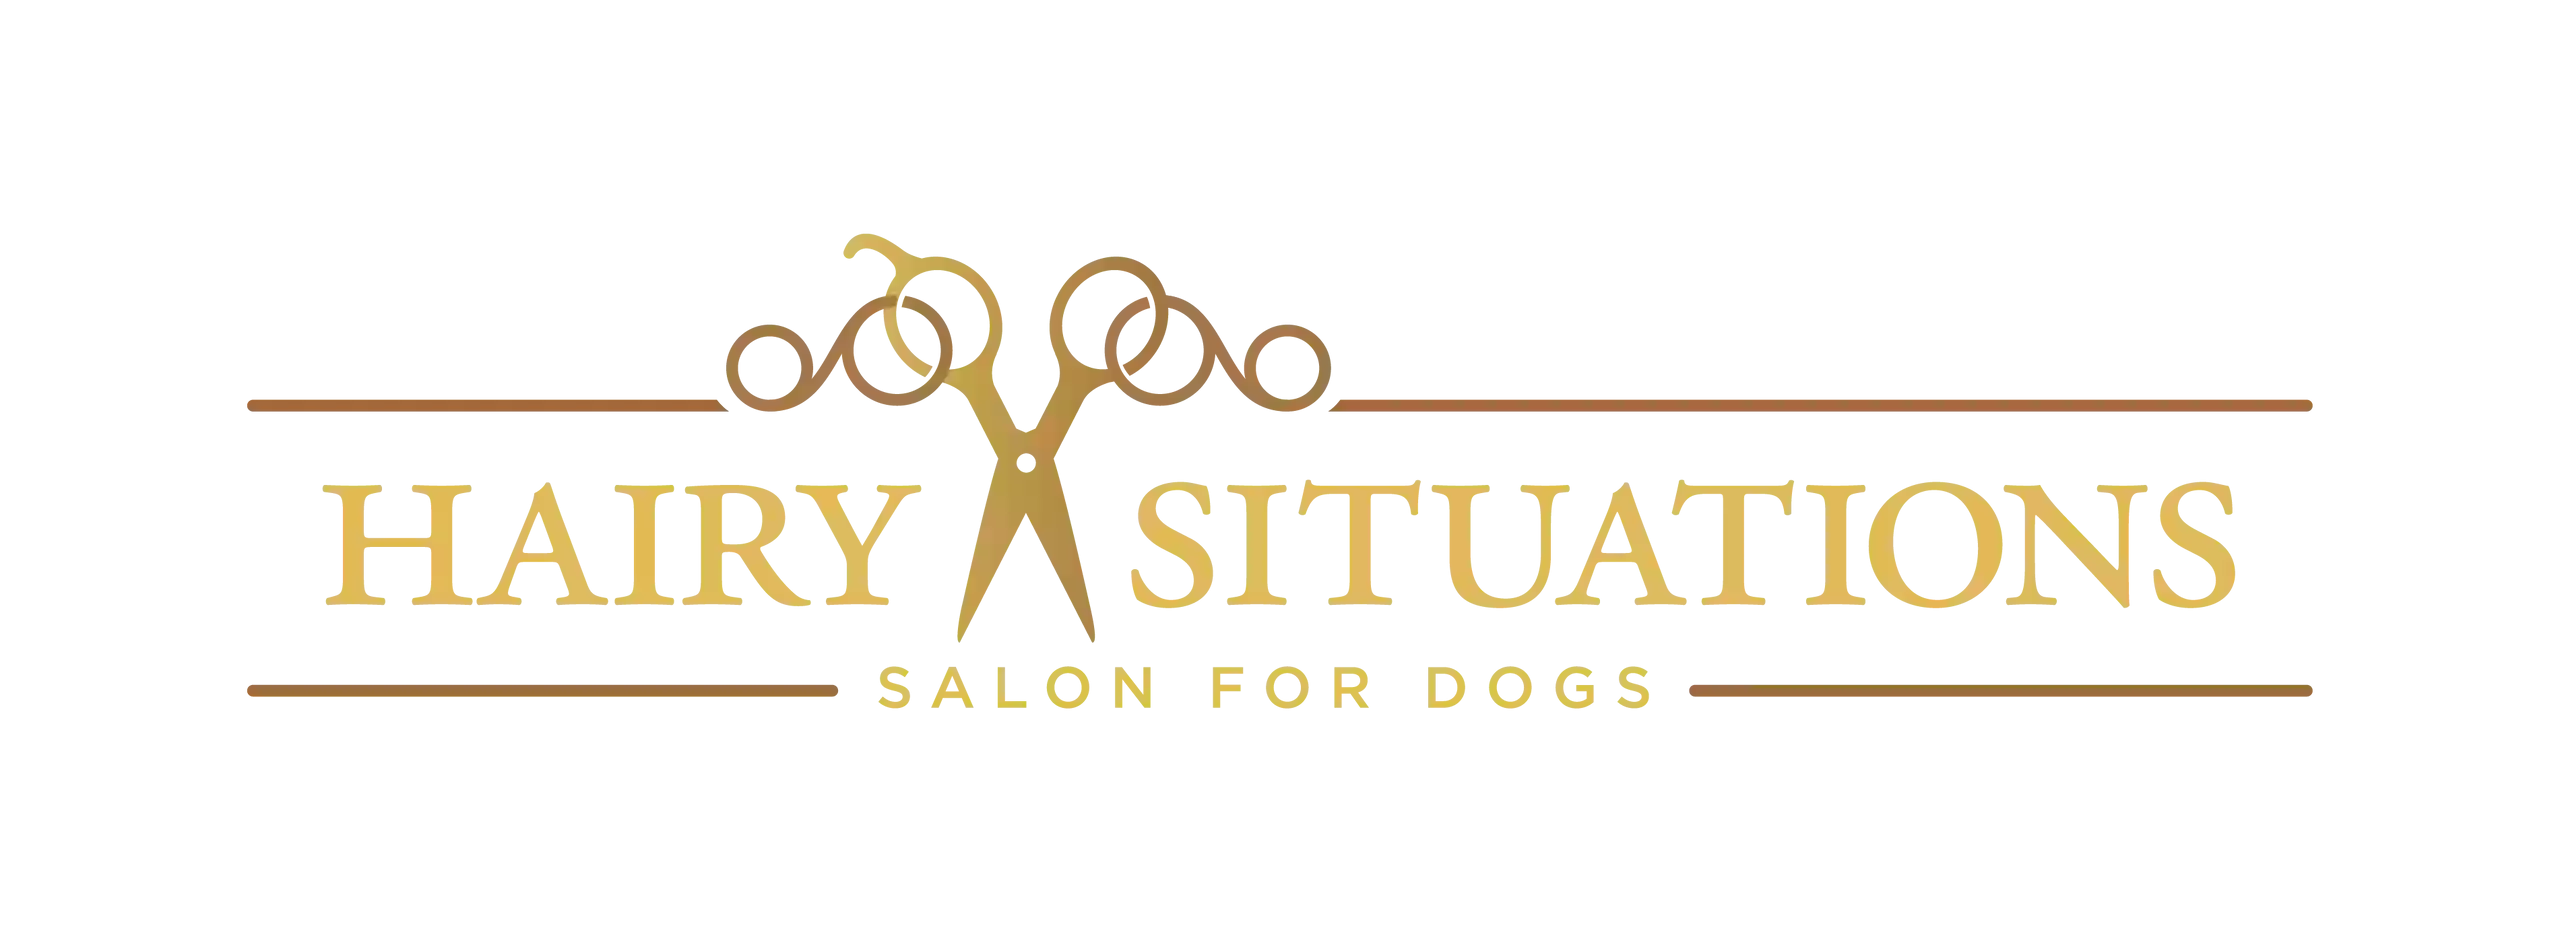 Hairy Situations Salon For Dogs